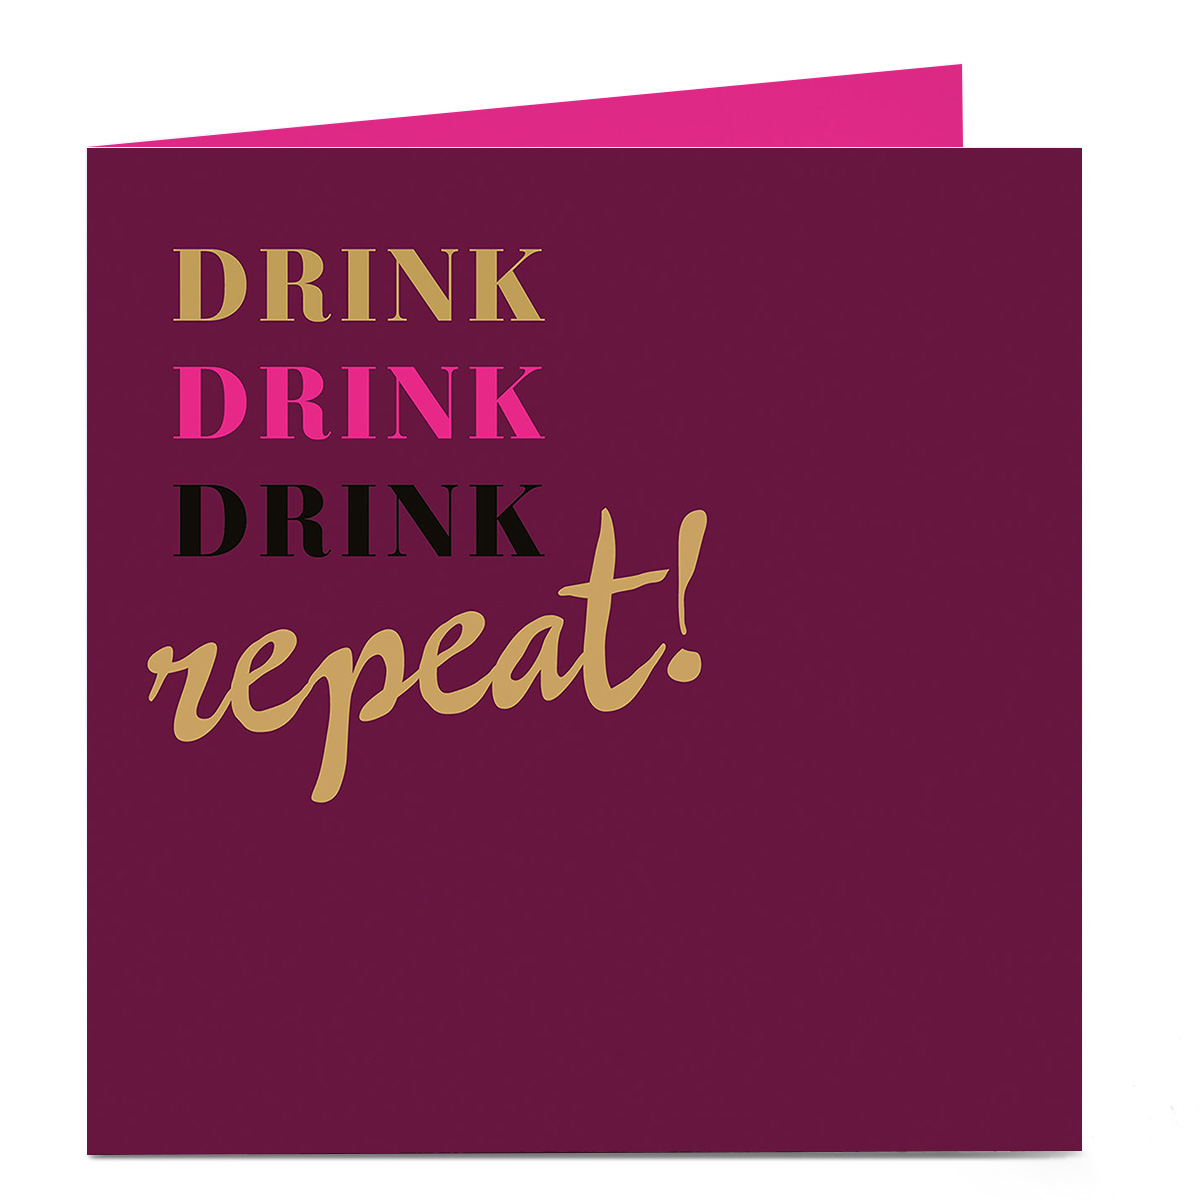 Personalised Bright Ideas Card - Drink Drink Drink Repeat!